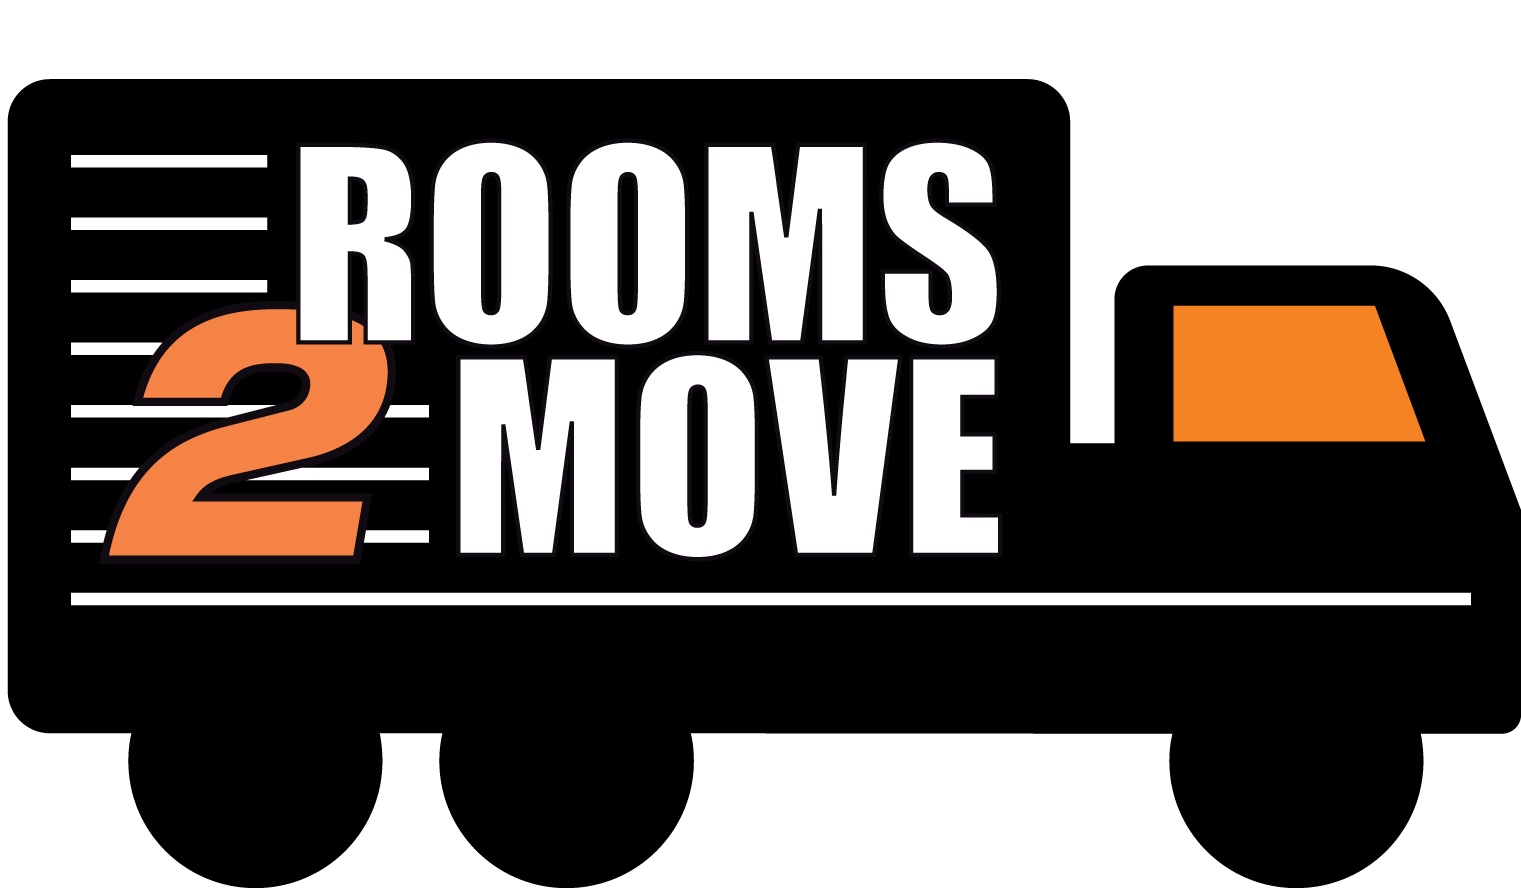 ROOMS 2 MOVE